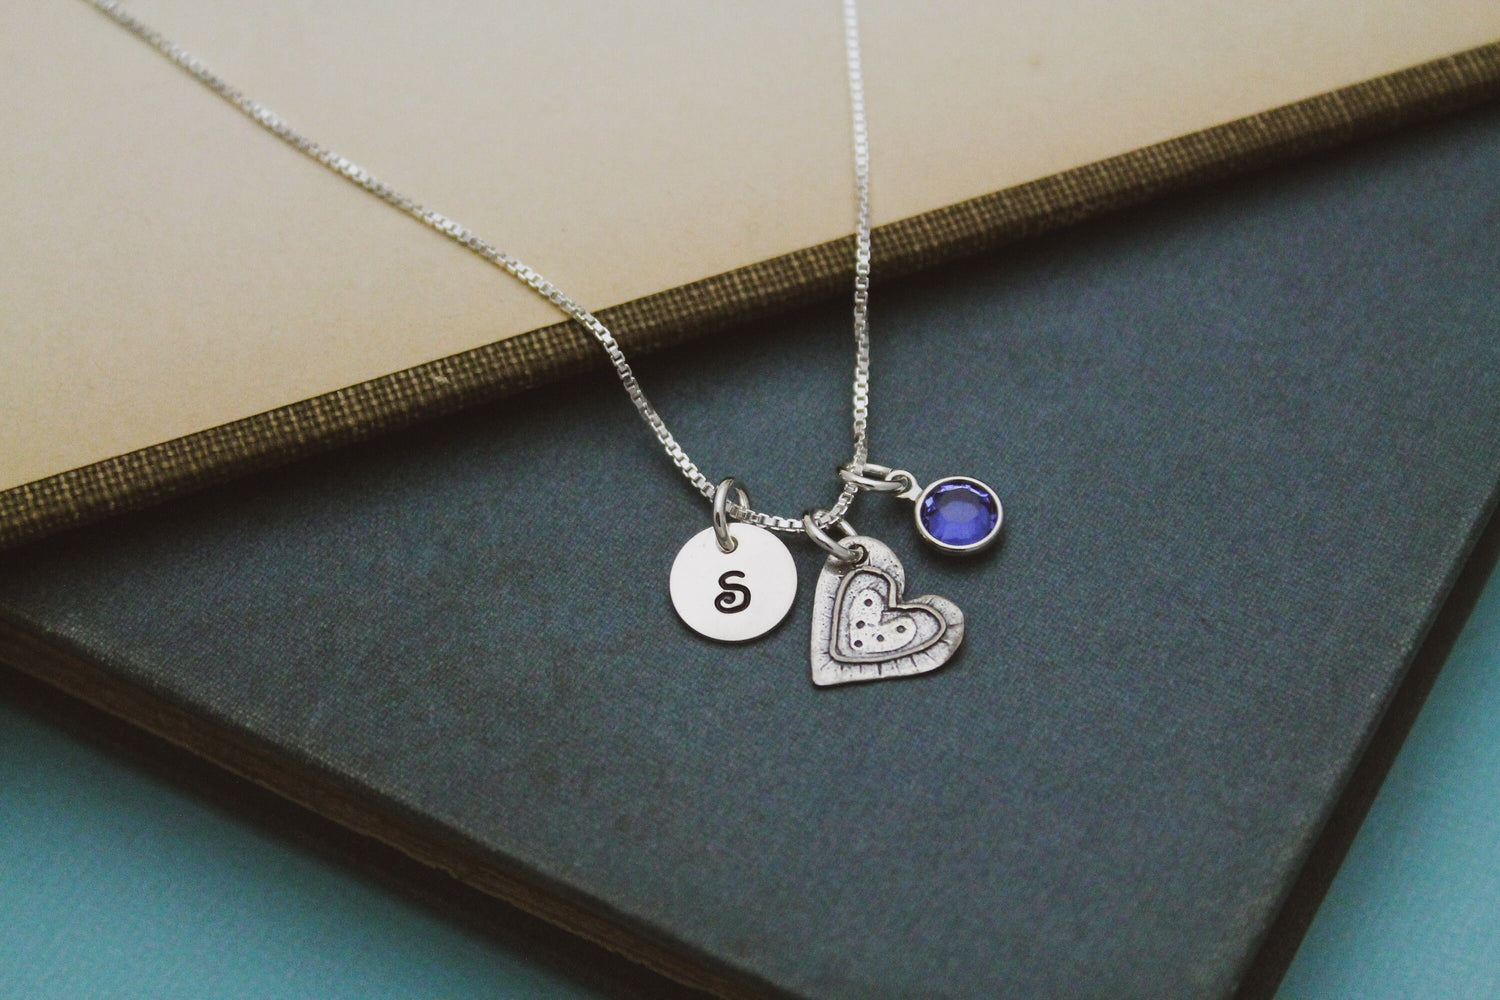 Cute September Birthstone Initial Necklace, Sapphire Heart Jewelry, September Birthday Gift, September Birthstone Jewelry, Sterling Silver